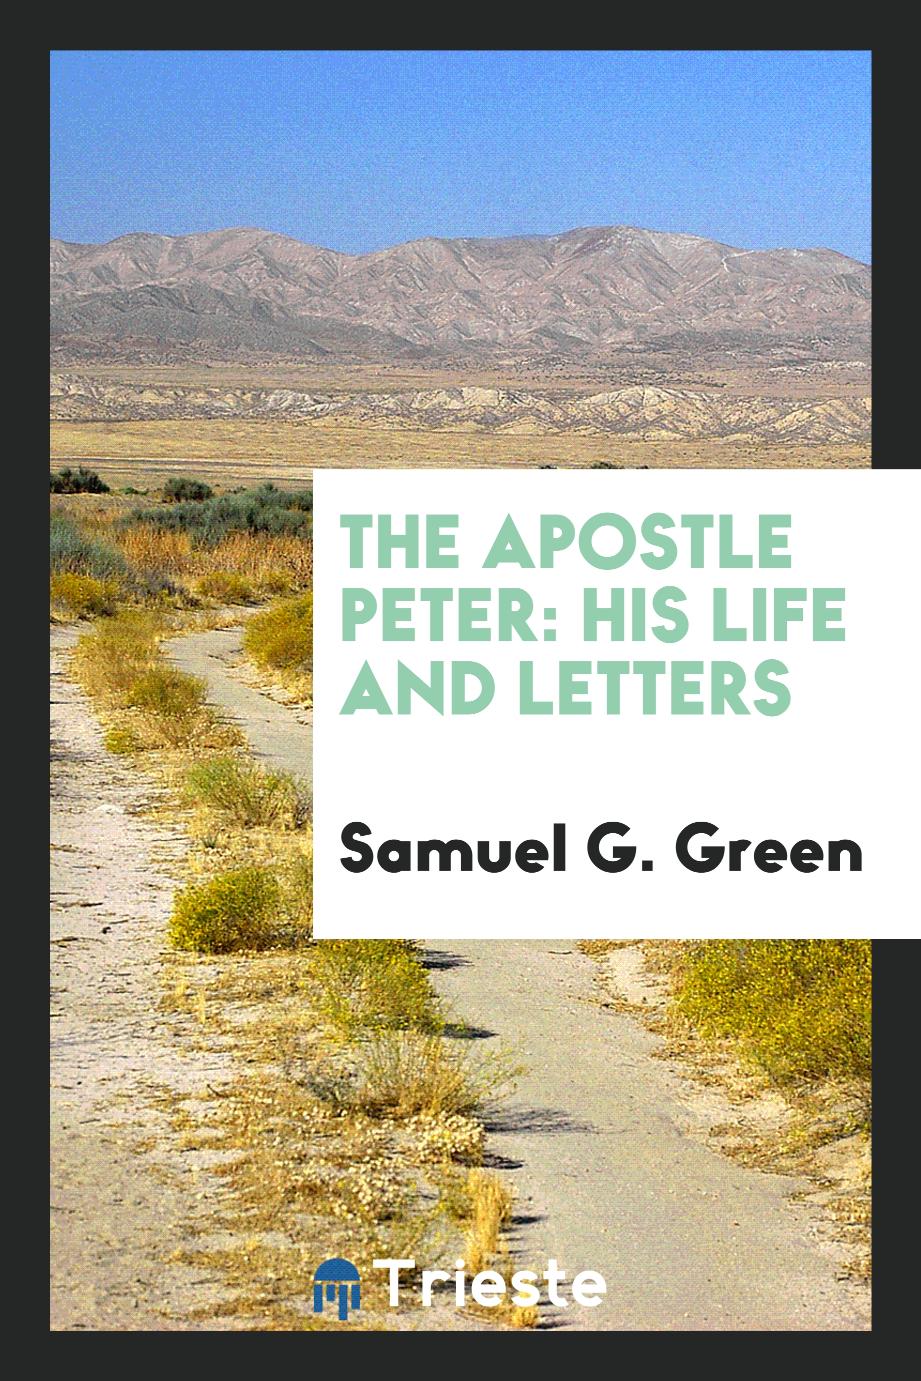 The apostle Peter: his life and letters